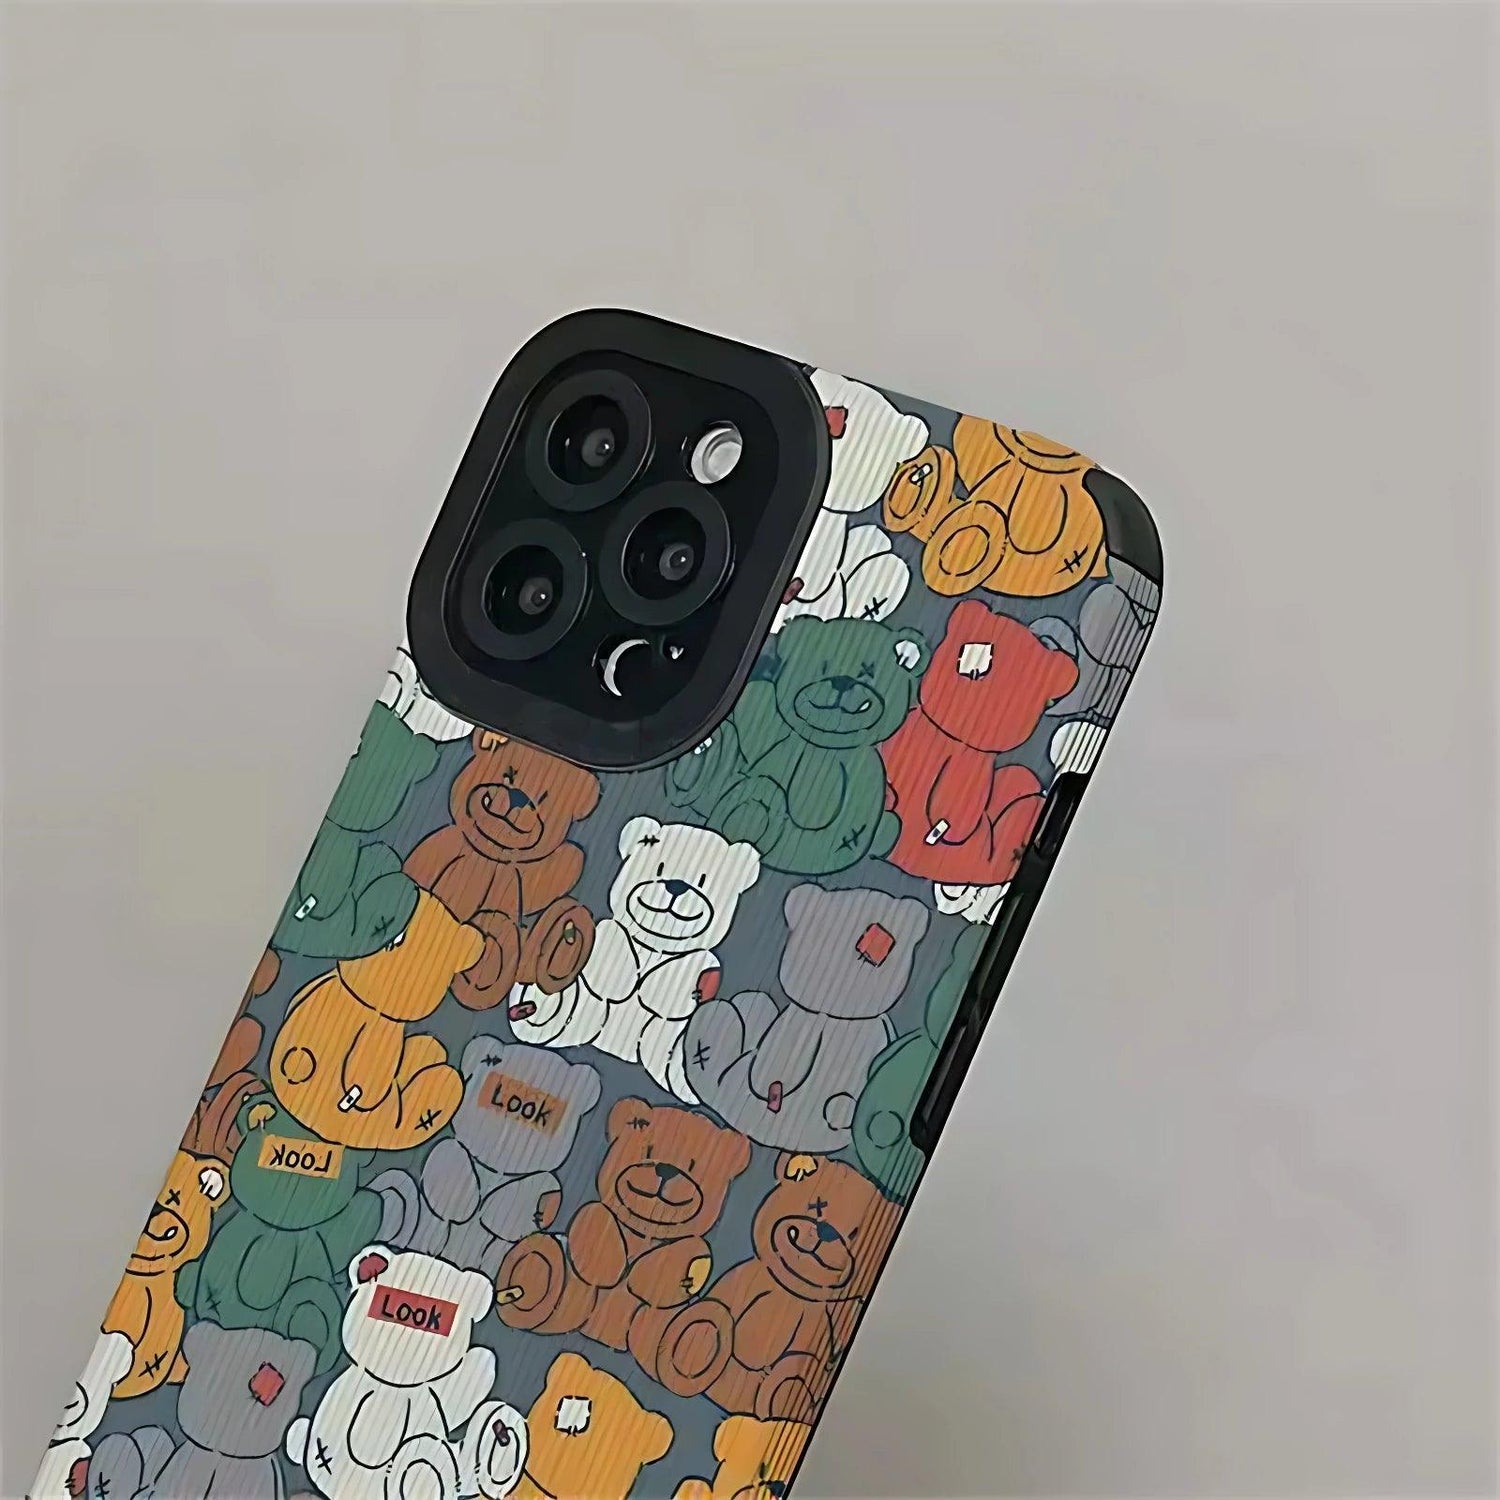 Cute Cartoon Colored Bears Phone Case for iPhone 6, SE, 7, 8, X, XR, XS, 11, 12, 13, 14, Pro Max, and Mini - Protective Cover - Touchy Style .